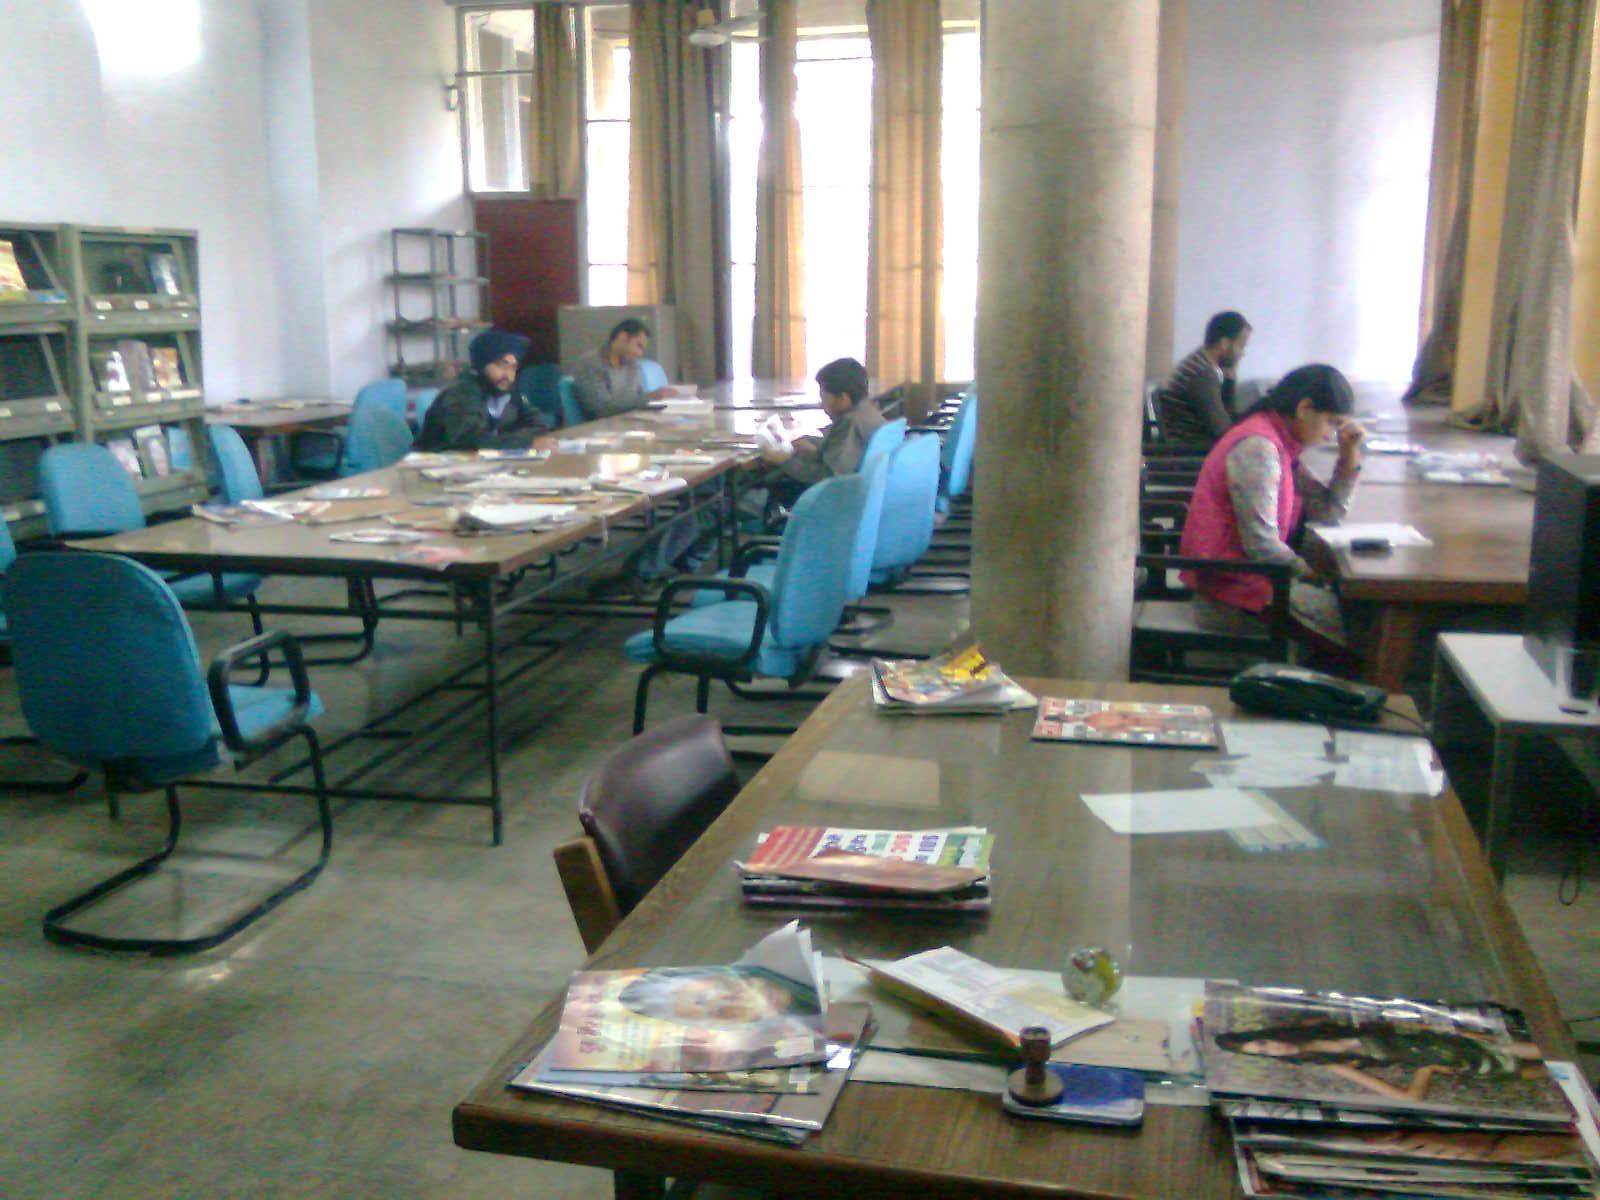 Magazine Section, Central State Library, Chandigarh